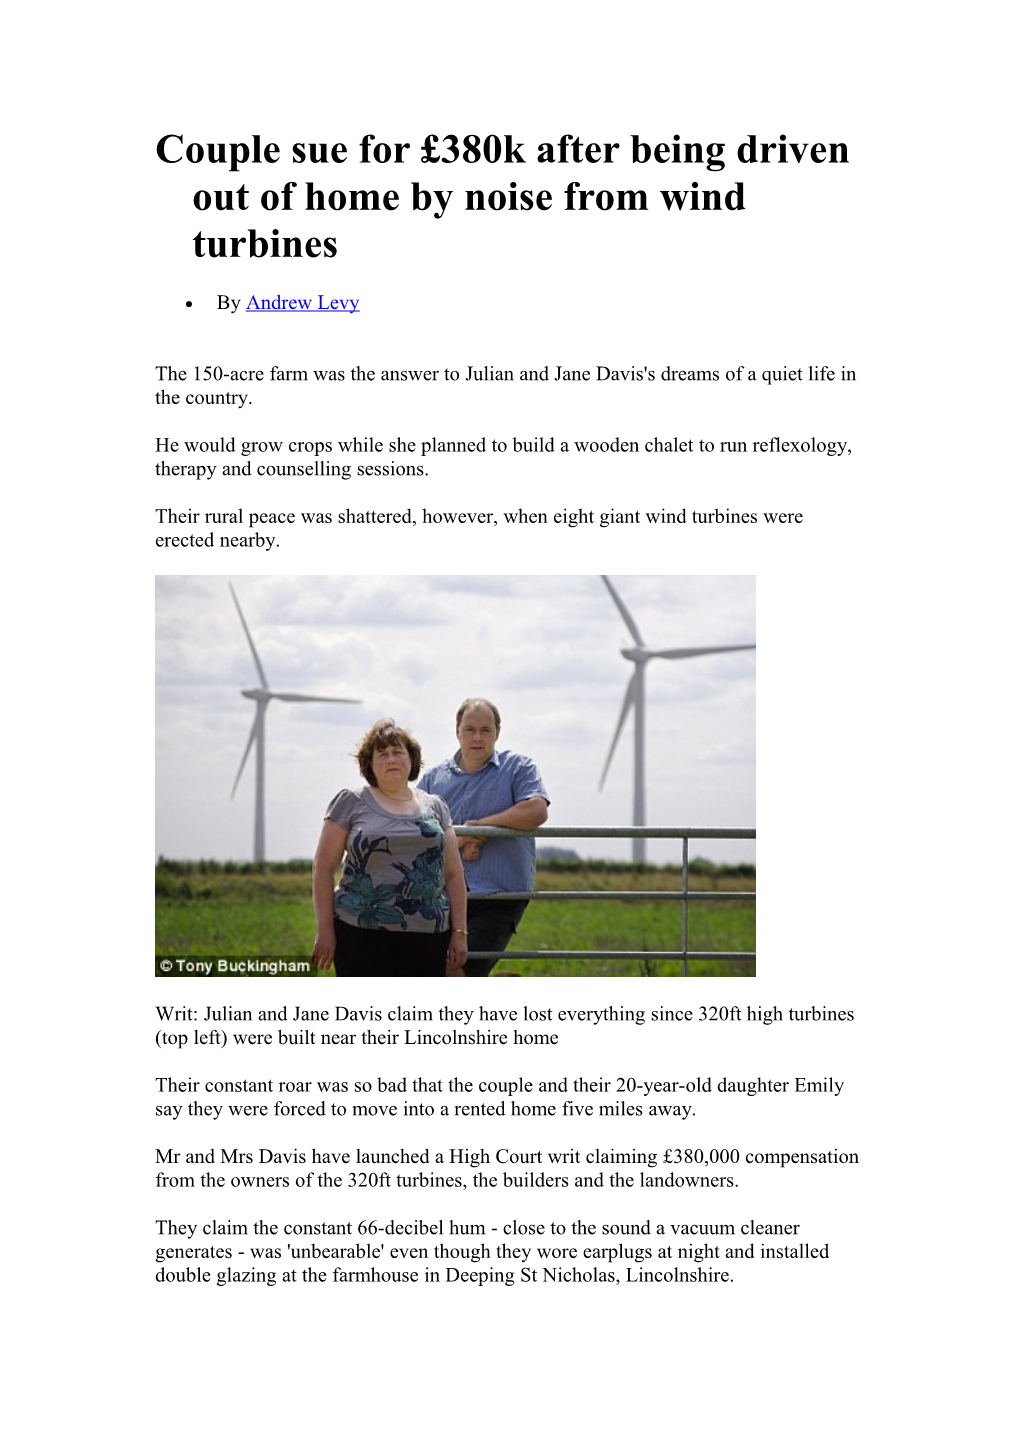 Couple Sue for 380K After Being Driven out of Home by Noise from Wind Turbines